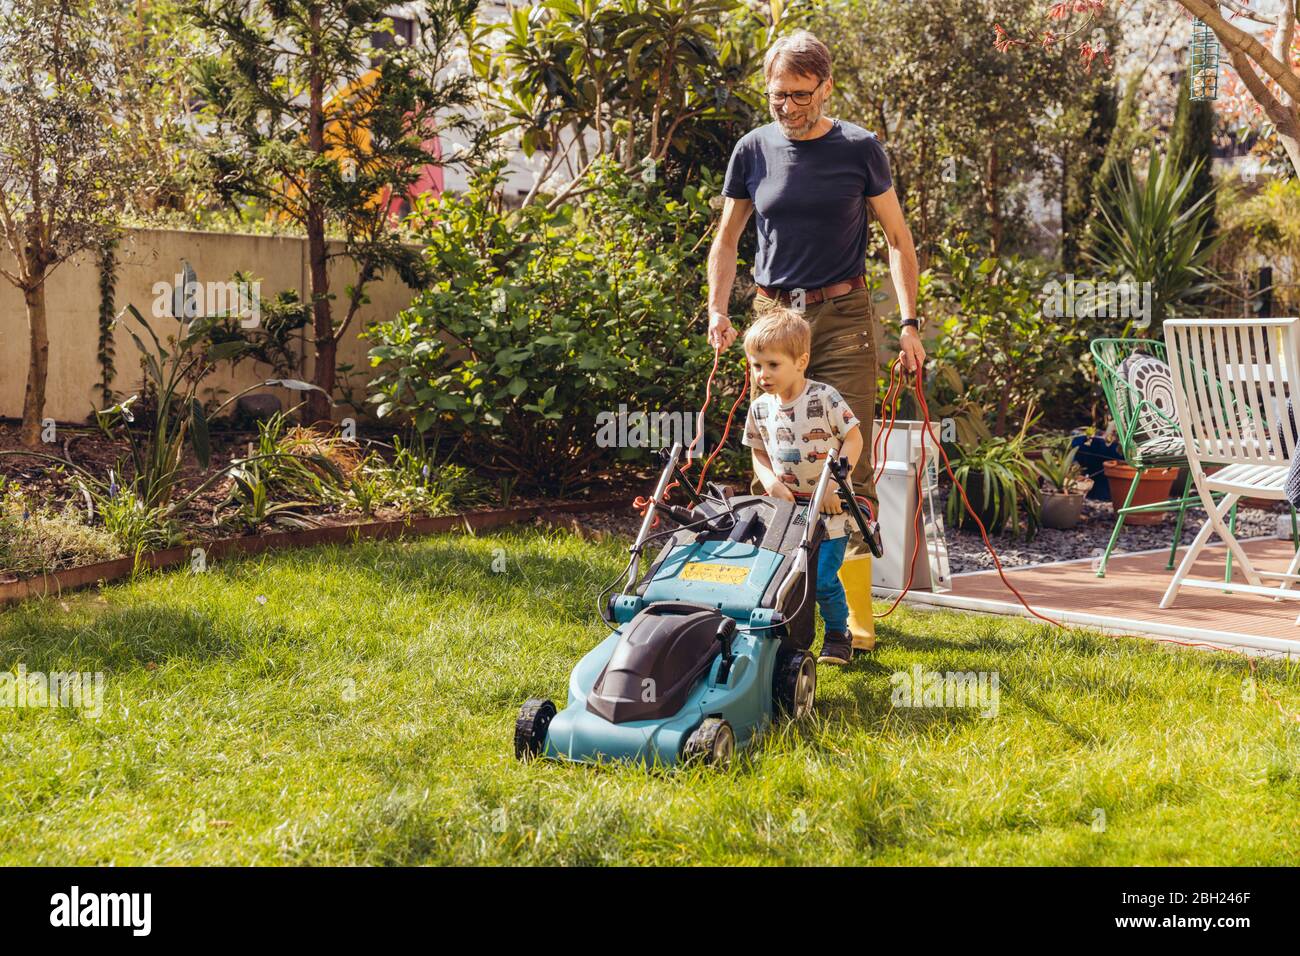 Father and son mowing the lawn together Stock Photo